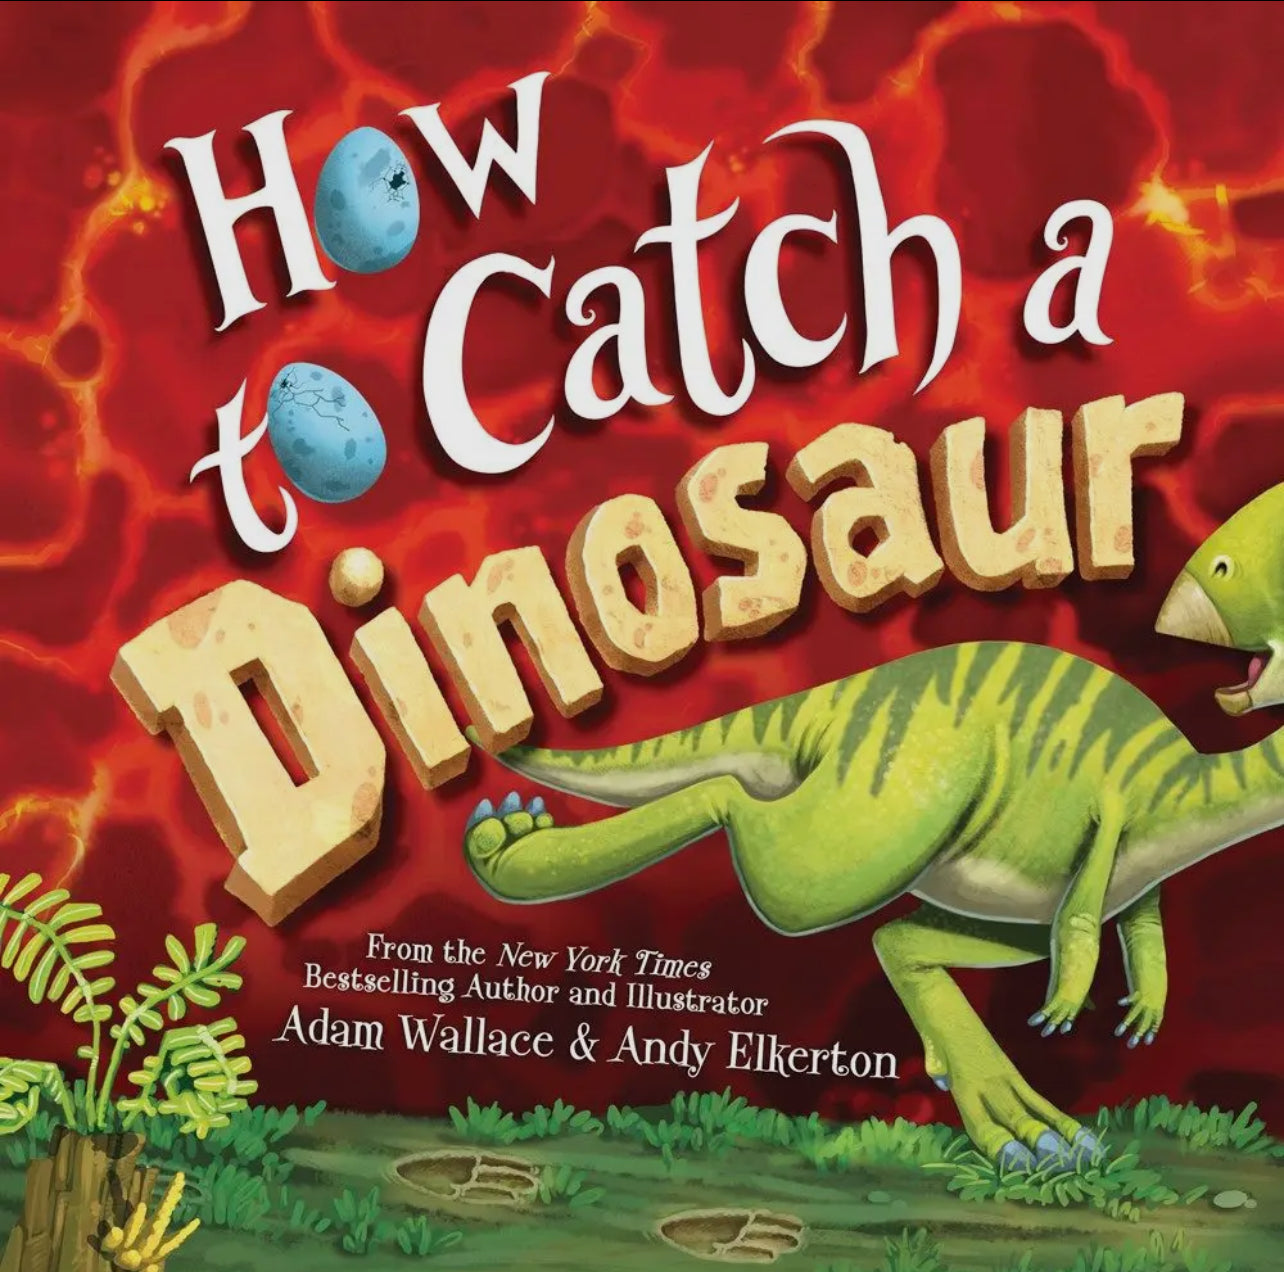 HOW TO CATCH A DINOSAUR HARDCOVER BOOK